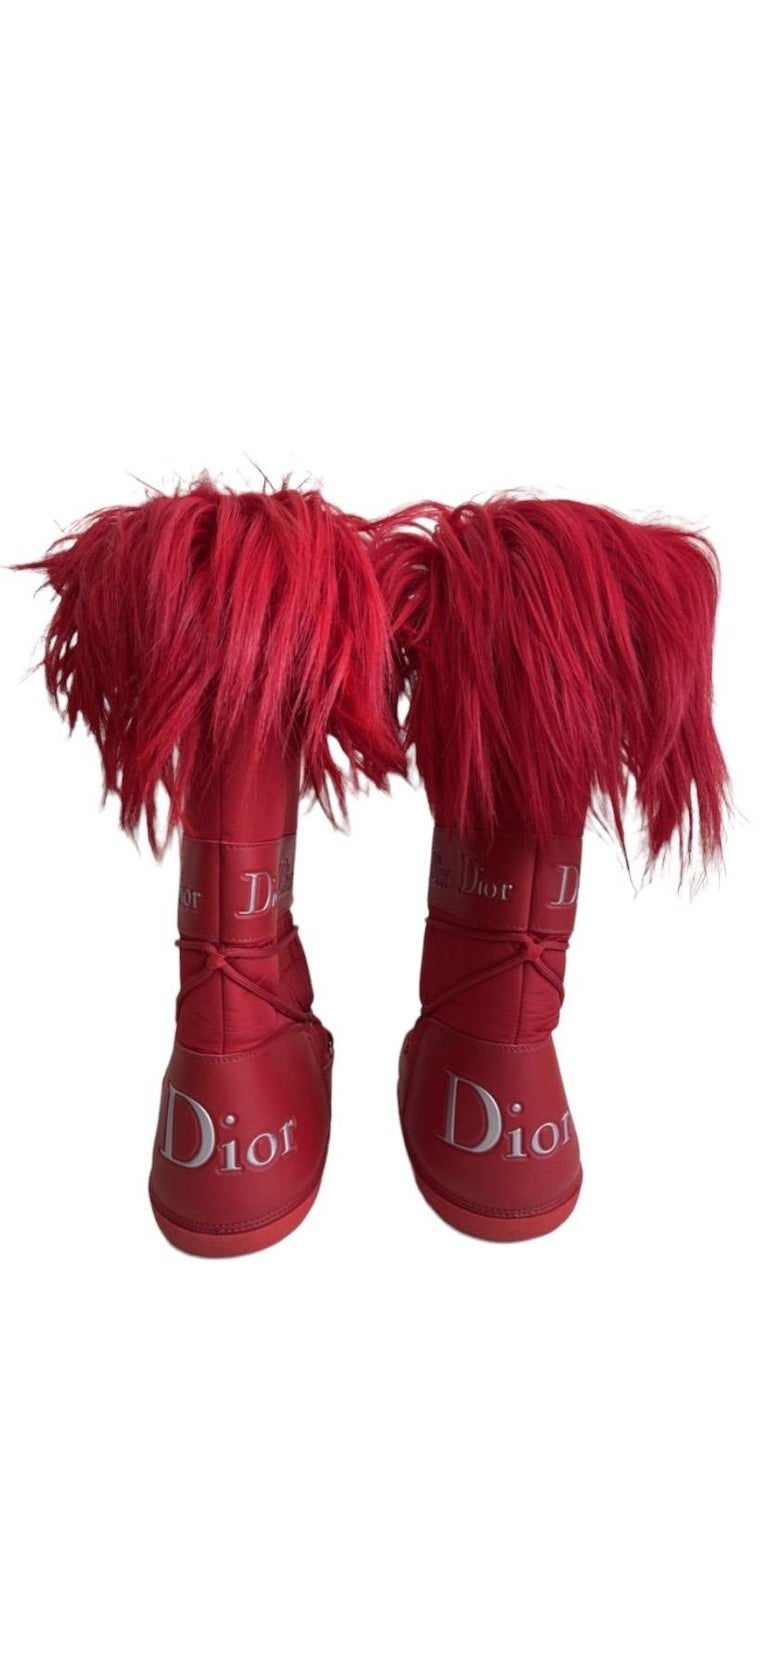 2004 Rare Vintage John Galliano for Christian Dior Moon Boots in Red